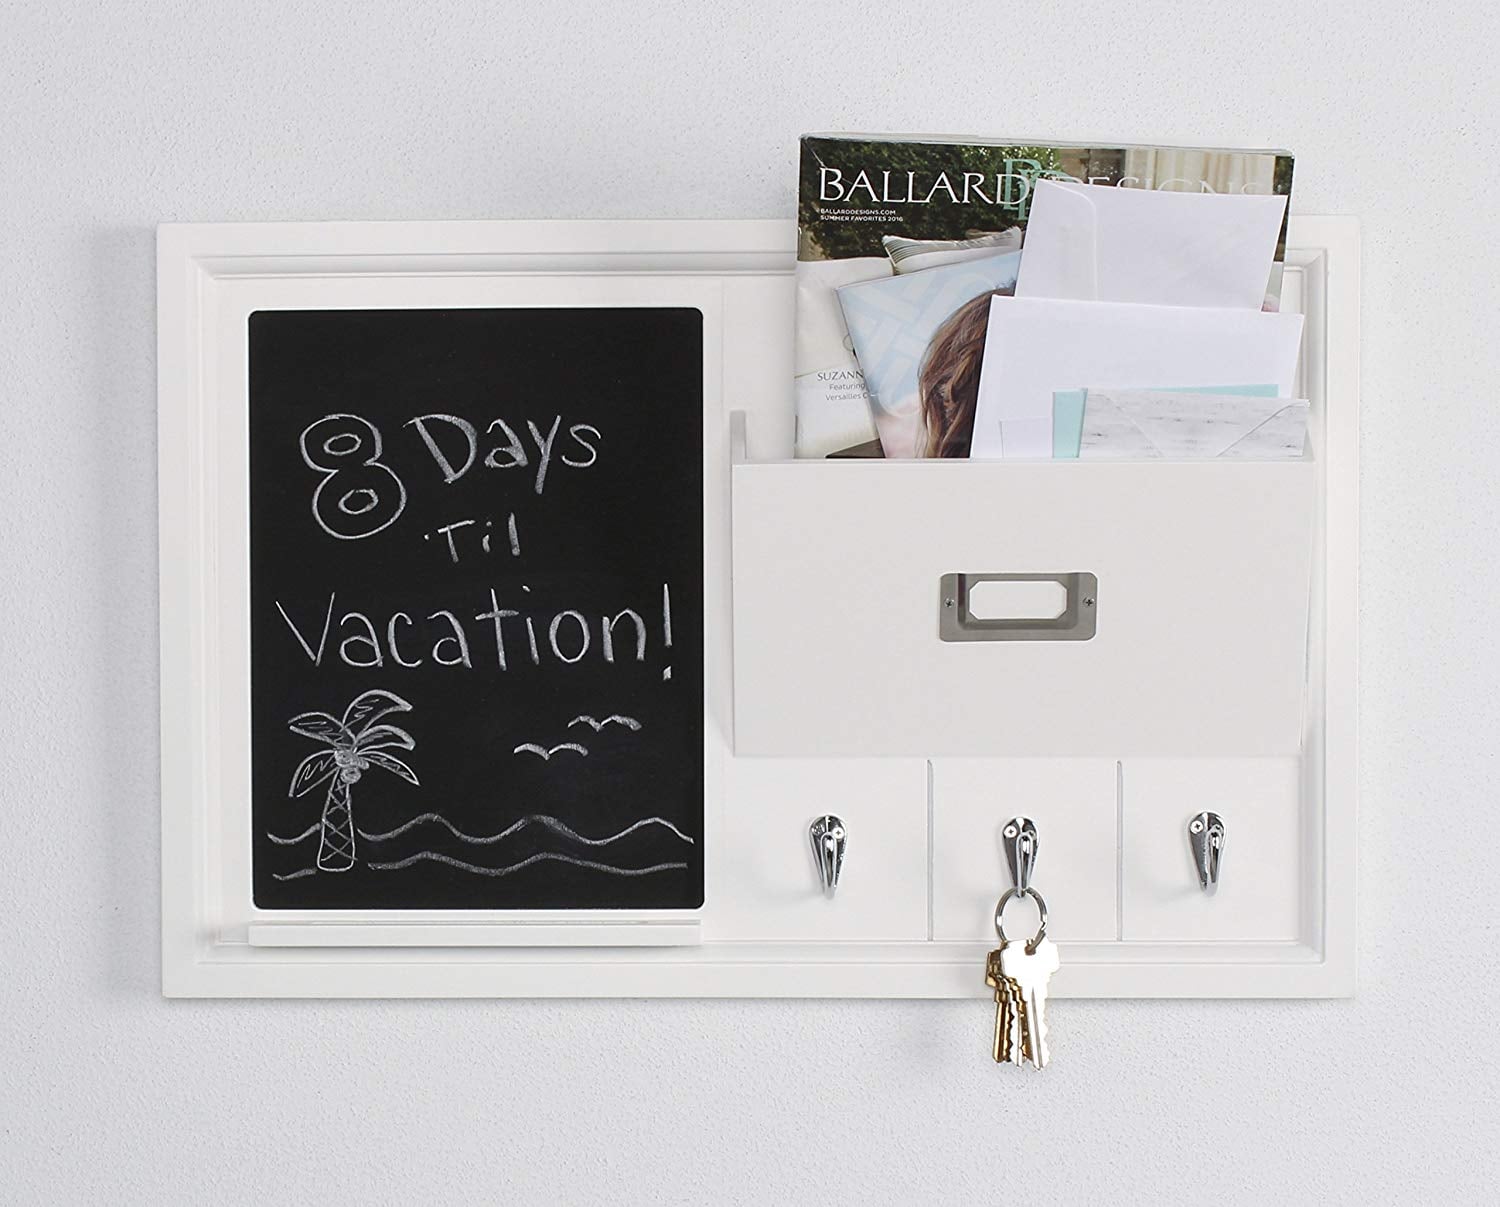 Decorative Home Organizer With Chalkboard Mail Holder And Key